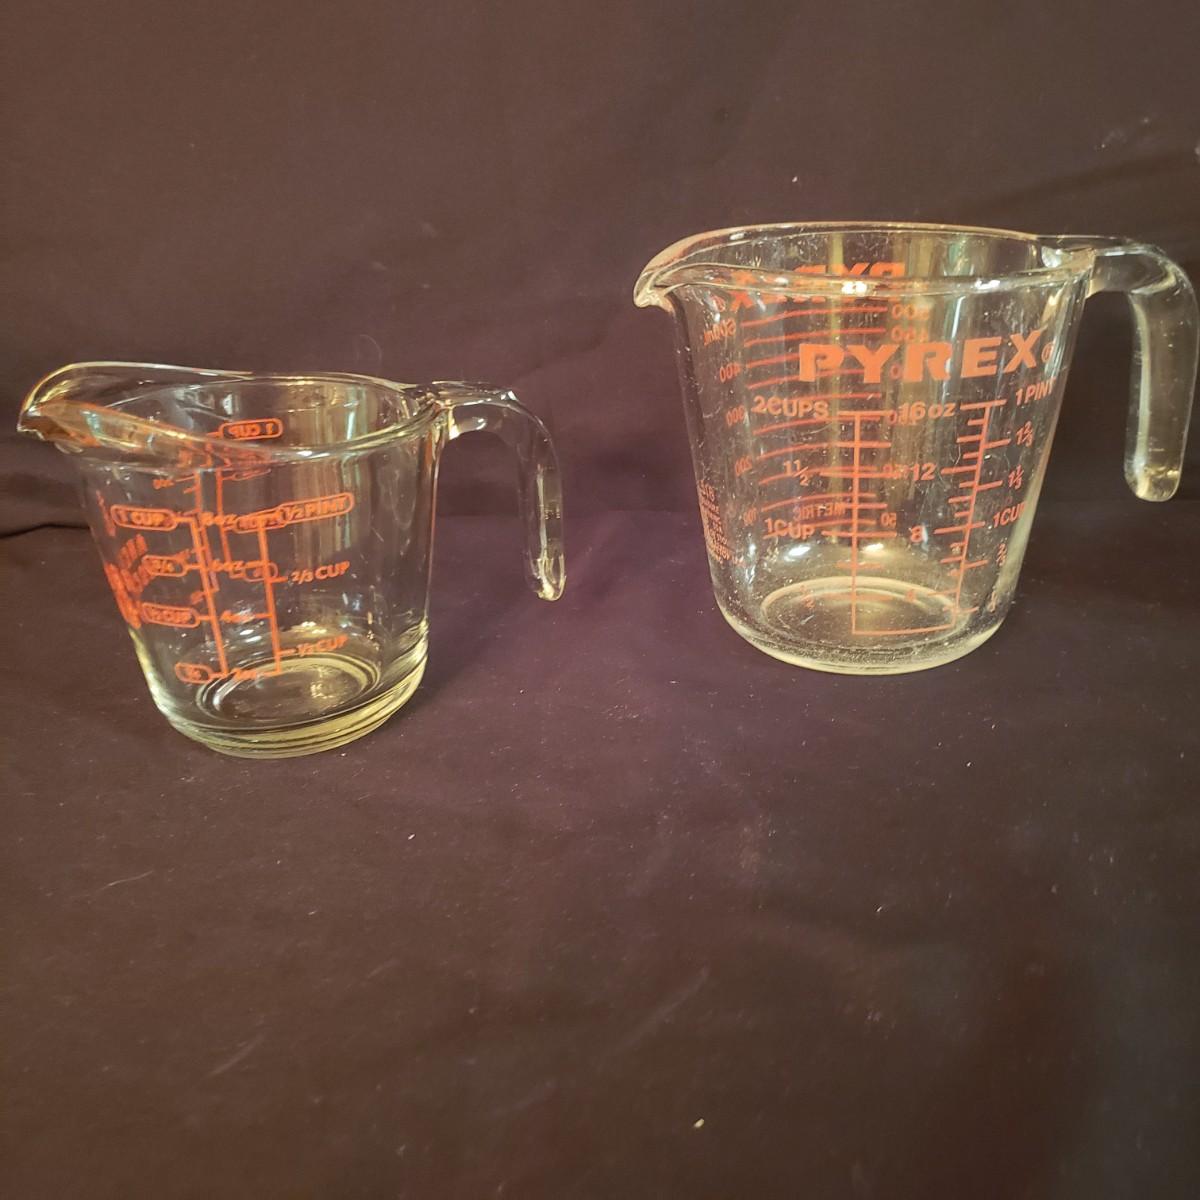 Sold at Auction: Lot of 3 Heavy Glass Measuring Cups Pyrex and Anchor  Hocking